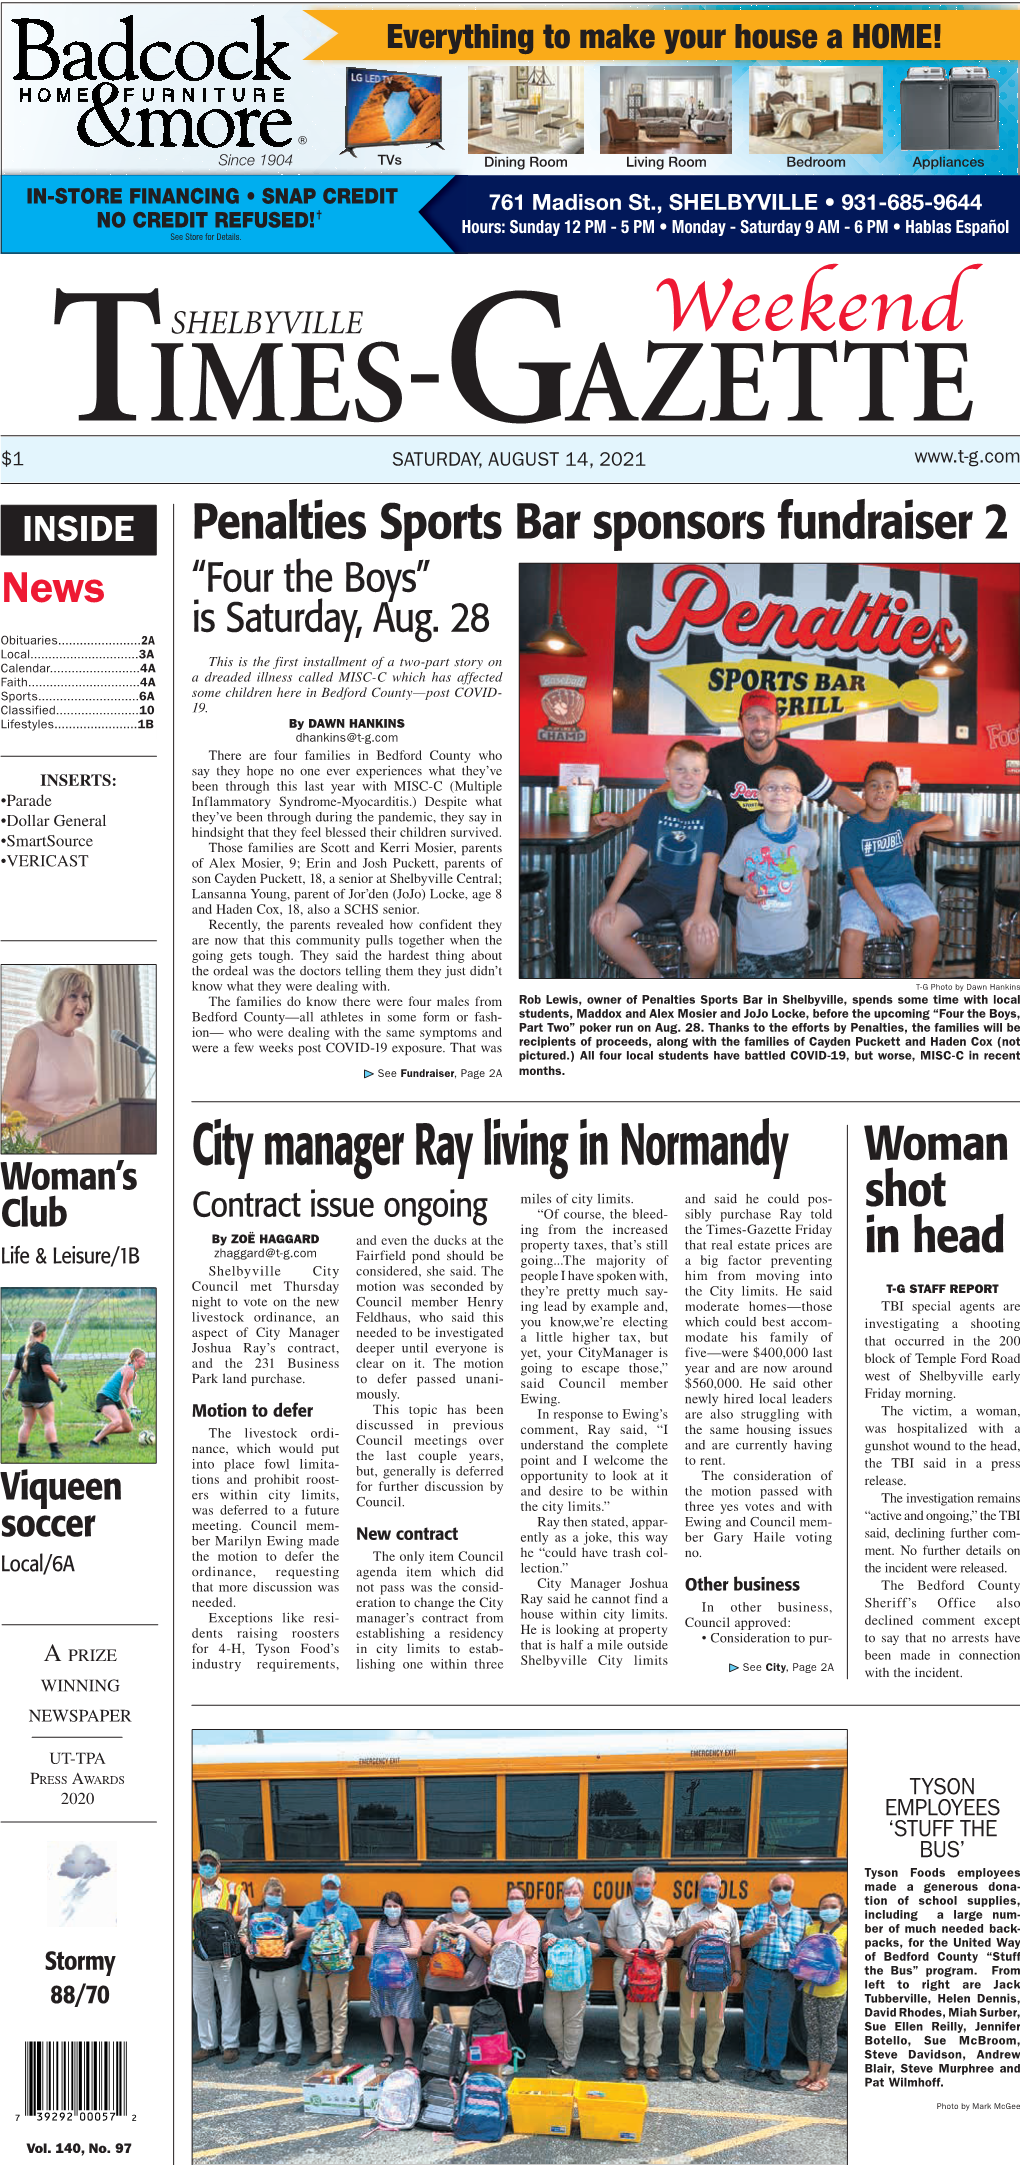 Weekend Imes- Azette T G $1 Saturday, August 14, 2021